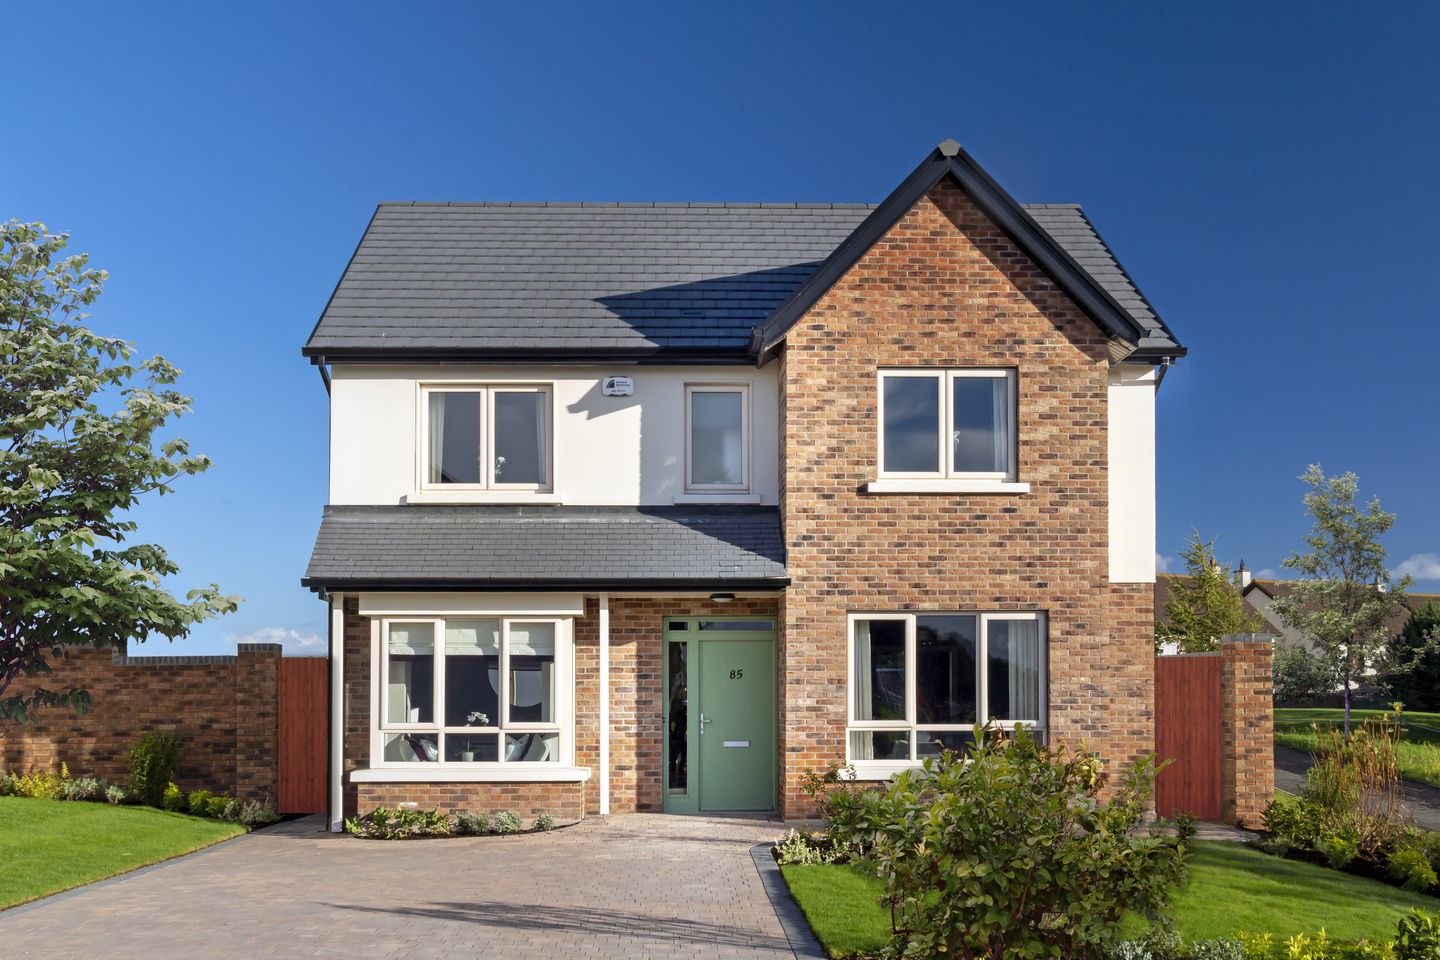 Willow - 4 bed detached, Marlmount, Marlmount, Old Dublin Road, Dundalk, Co. Louth